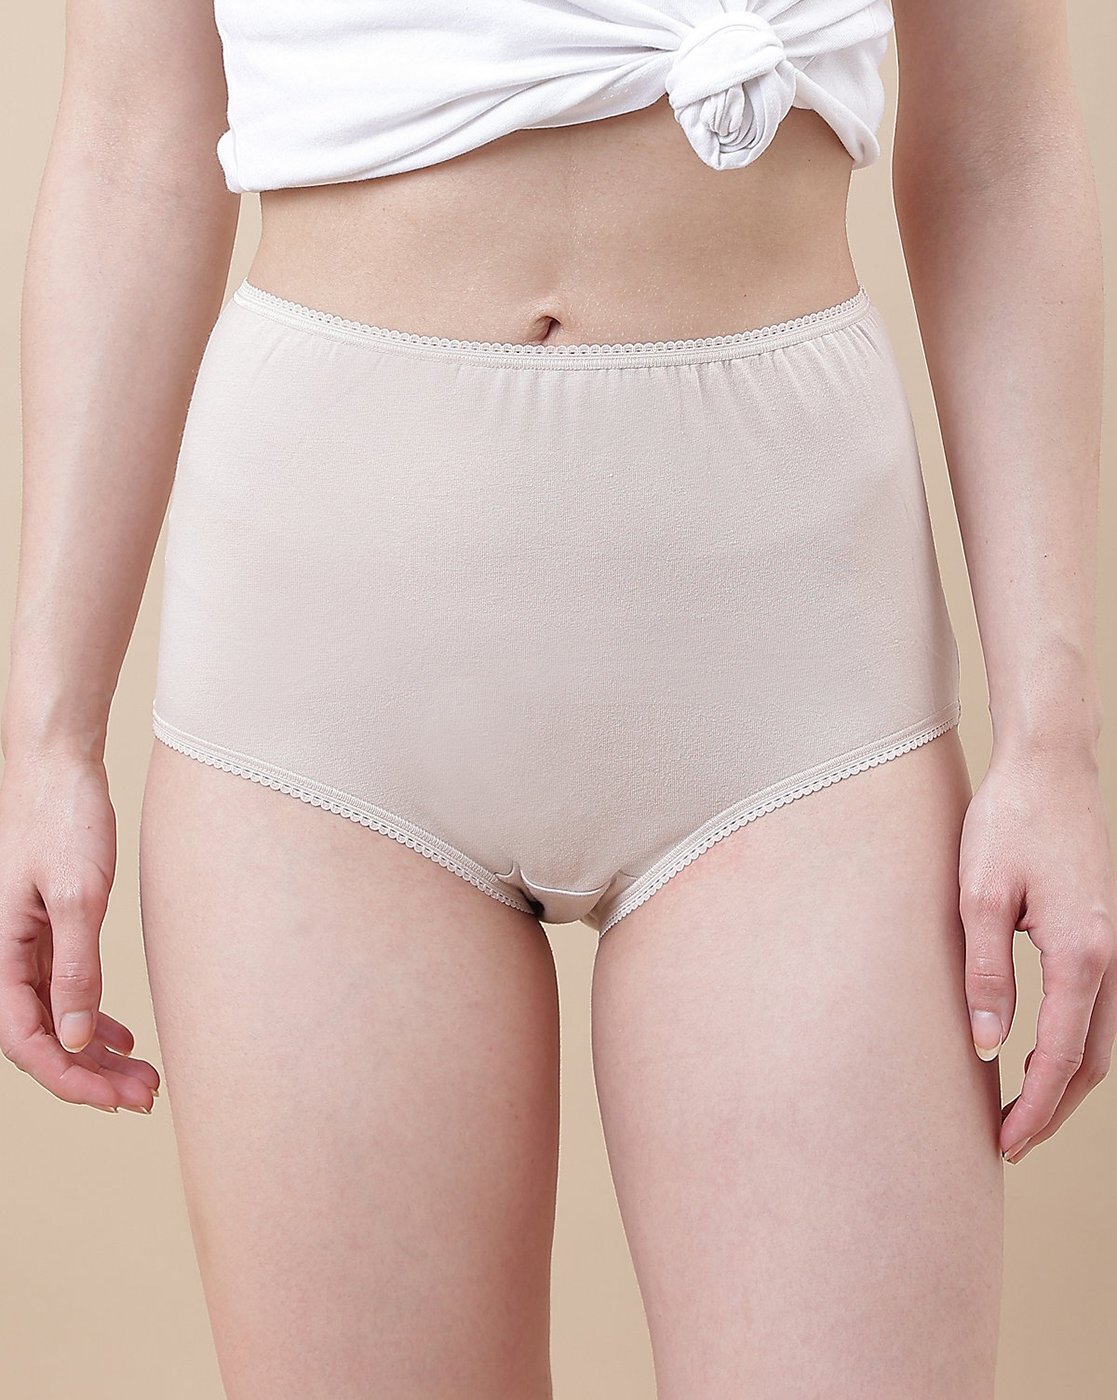 Buy Nude Panties for Women by Marks & Spencer Online